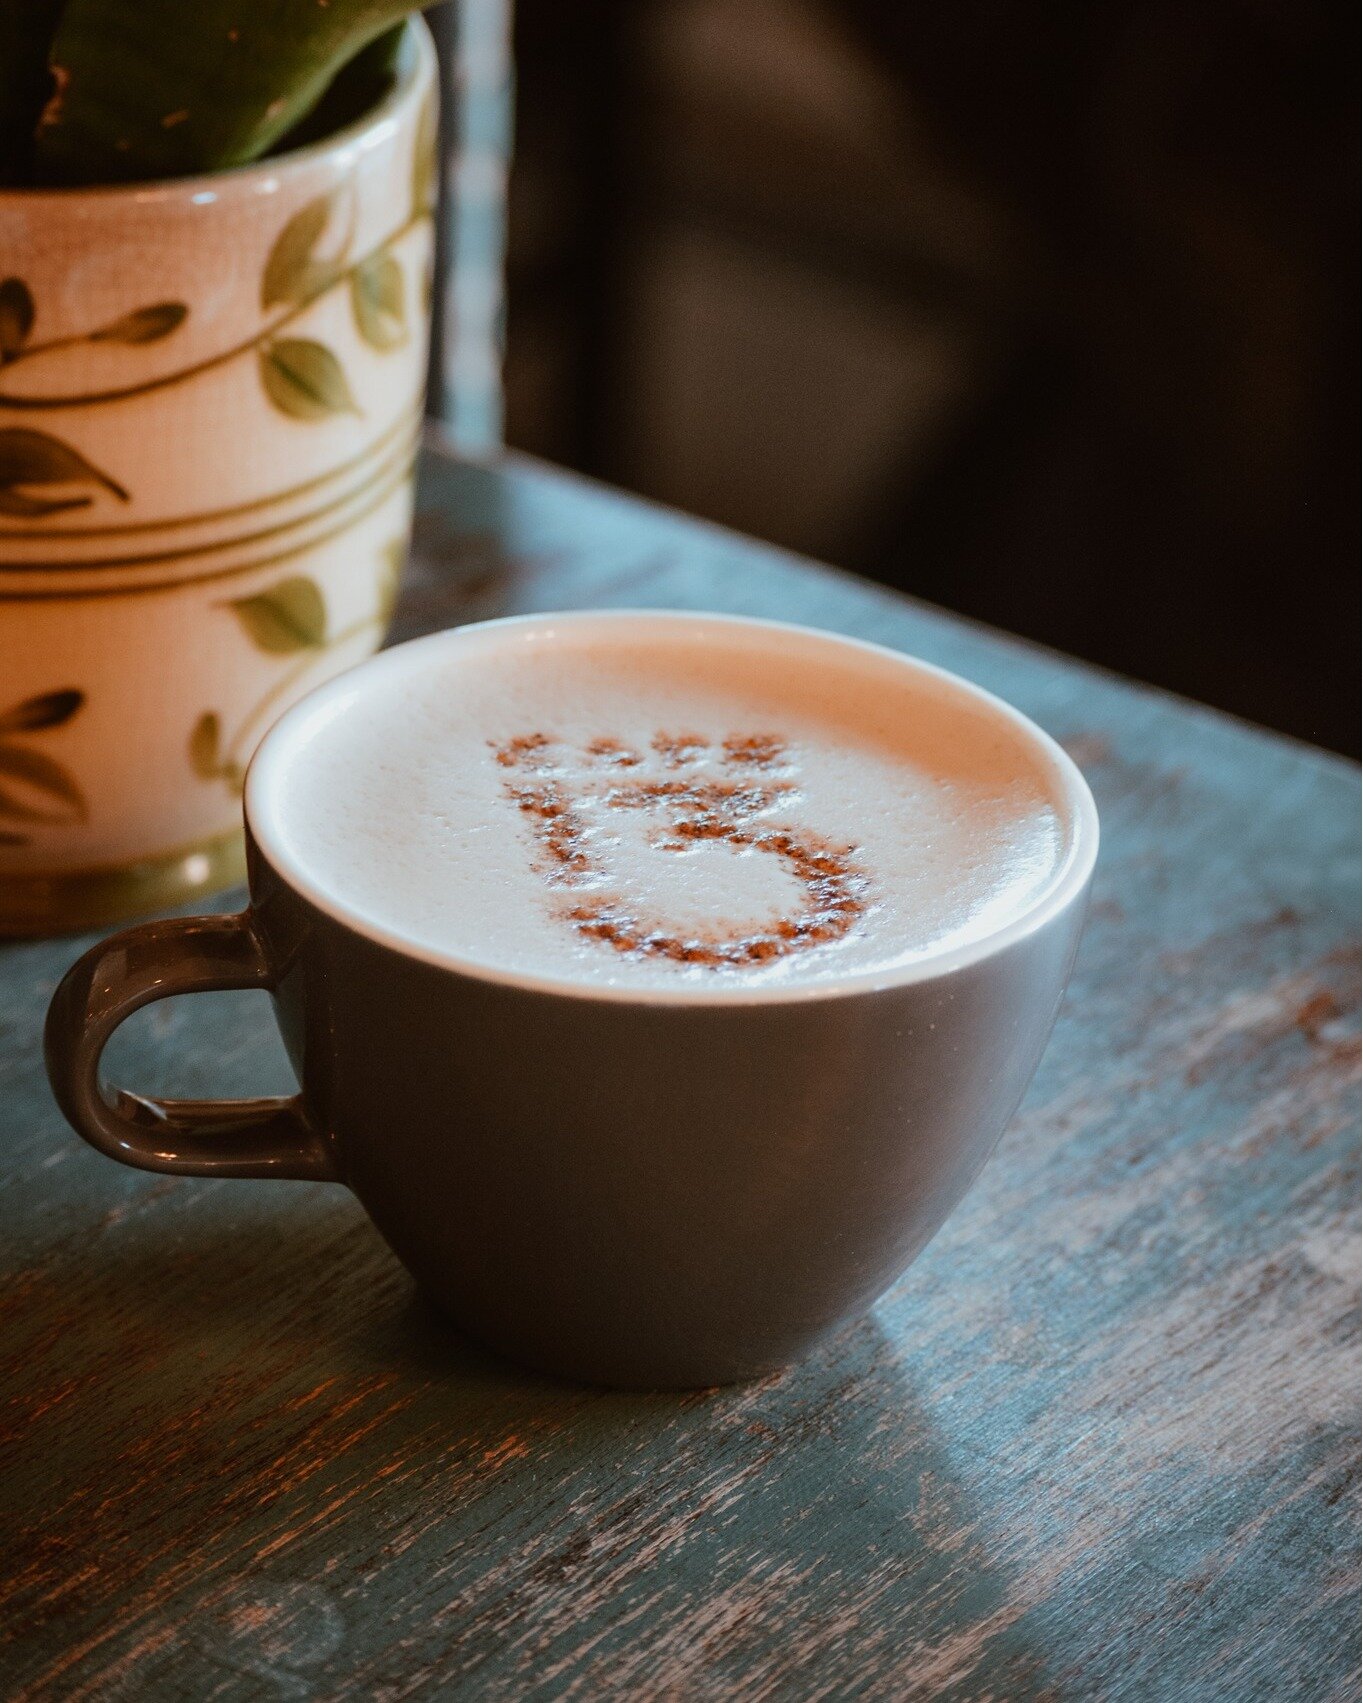 Warm your body and soul with our new Tea House Chai from @boulderteaco ! A blend of bold black tea infused with cinnamon, cardamom, ginger, and cloves. Steeped to perfection and mixed with steamed milk, don't wait, order yours today and start your mo